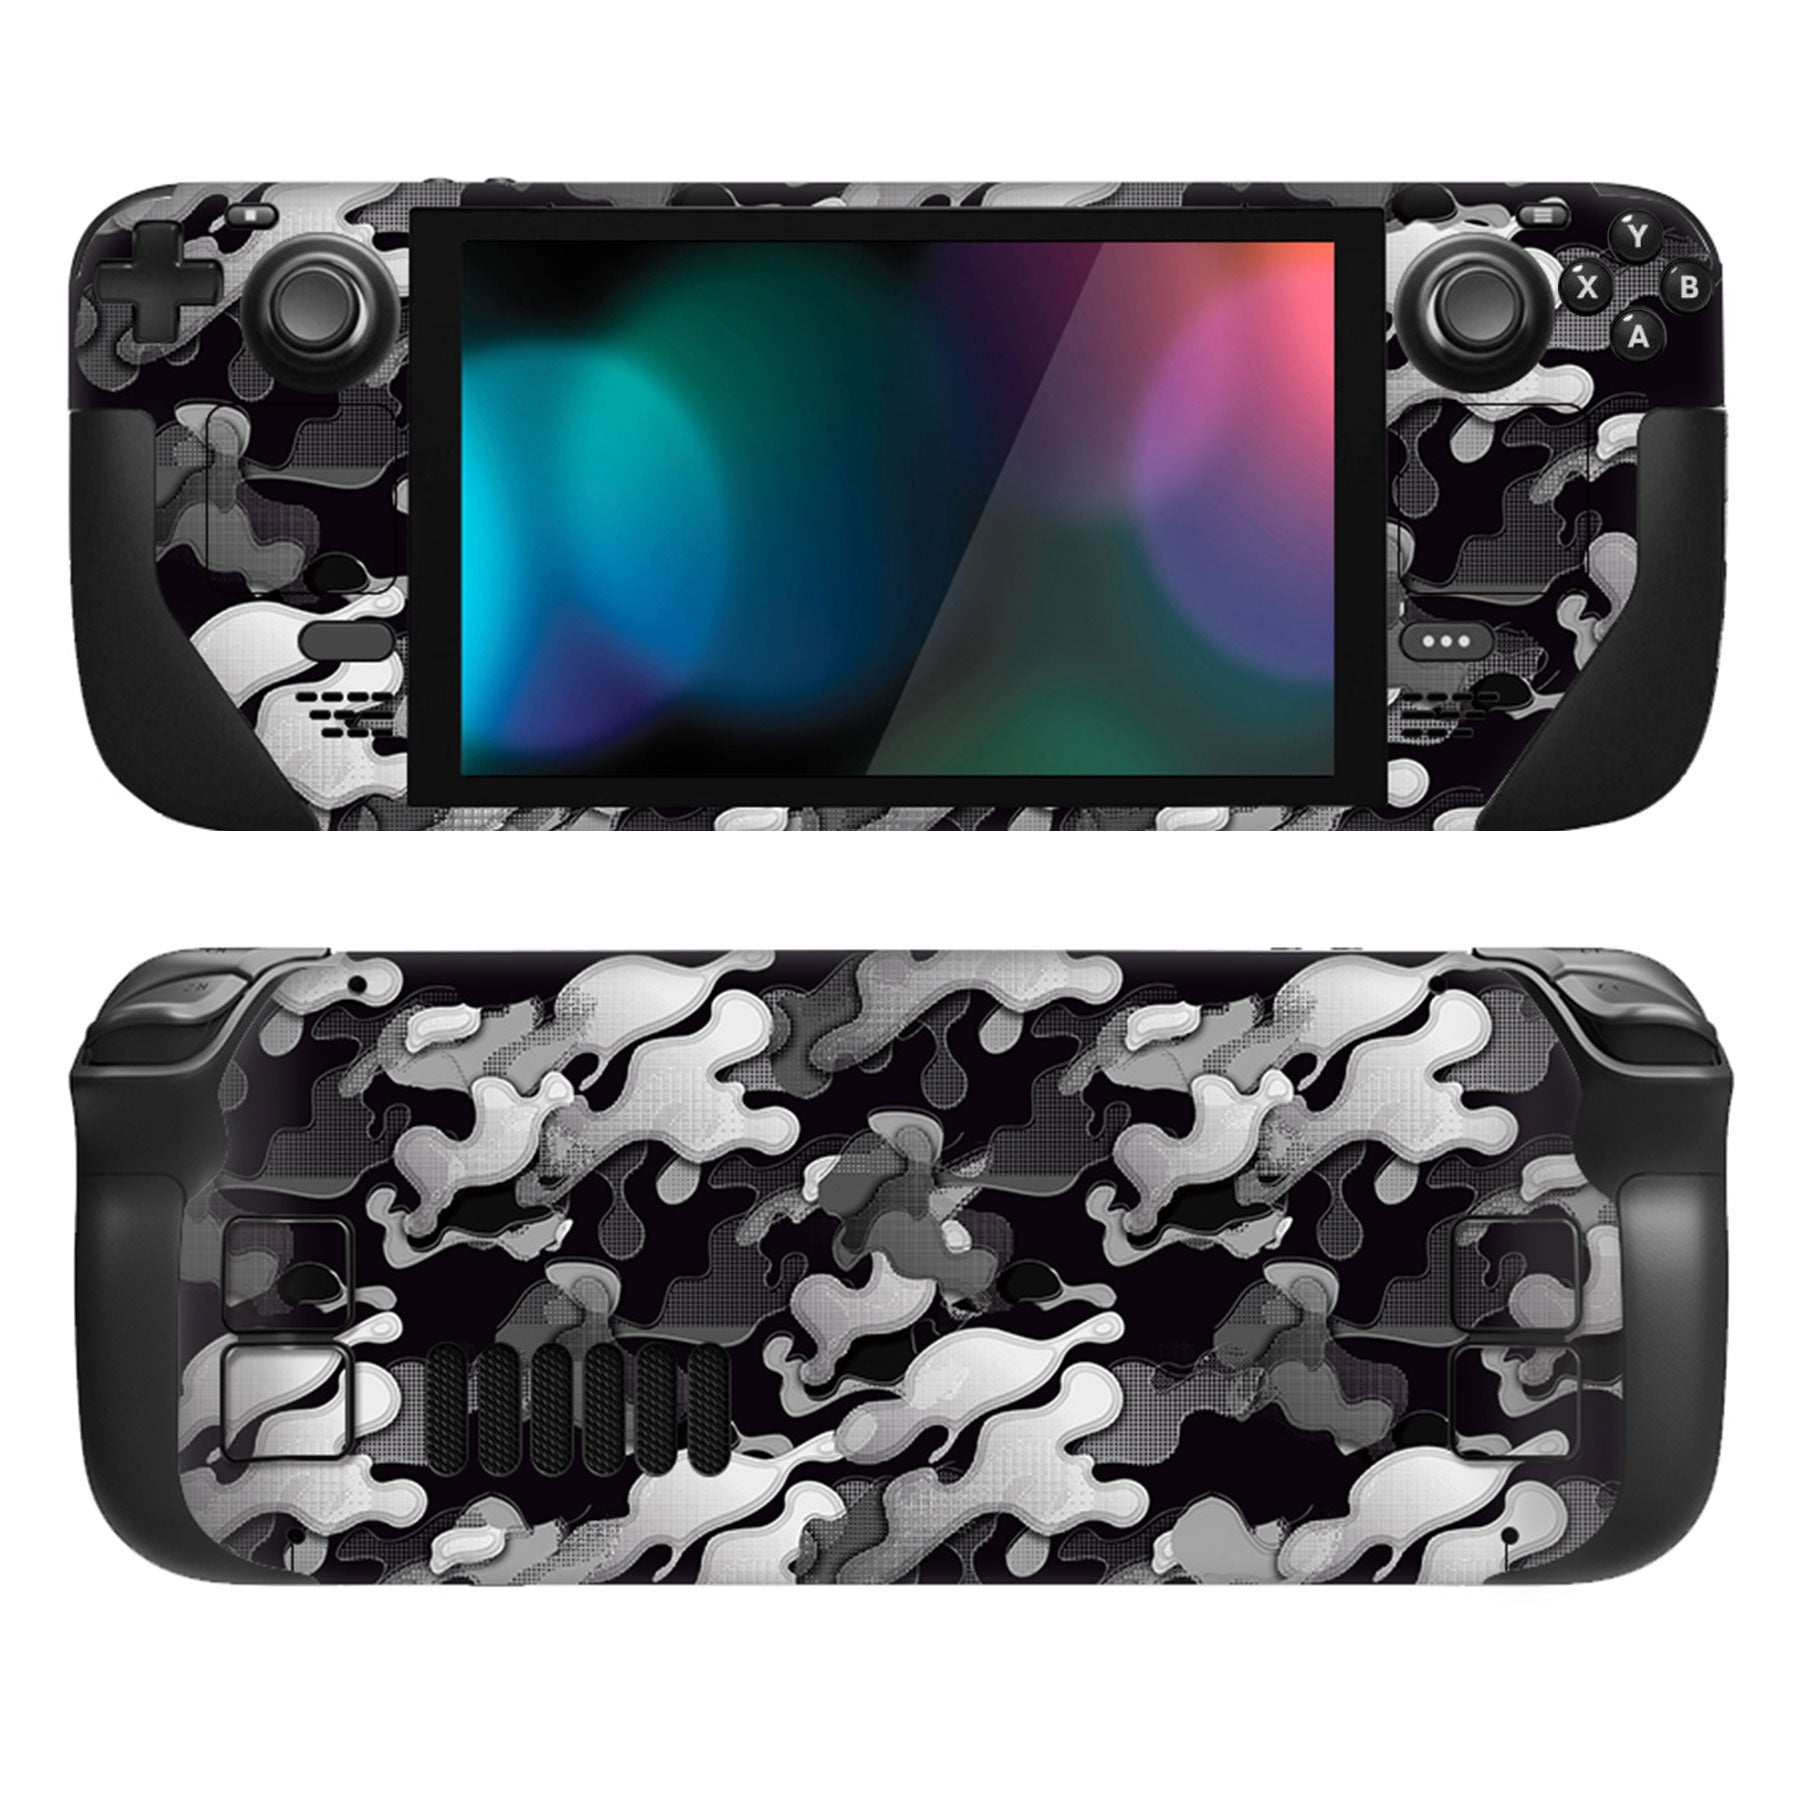 PlayVital Full Set Protective Skin Decal for Steam Deck, Custom Stickers Vinyl Cover for Steam Deck Handheld Gaming PC - Black White Camouflage - SDTM014 playvital